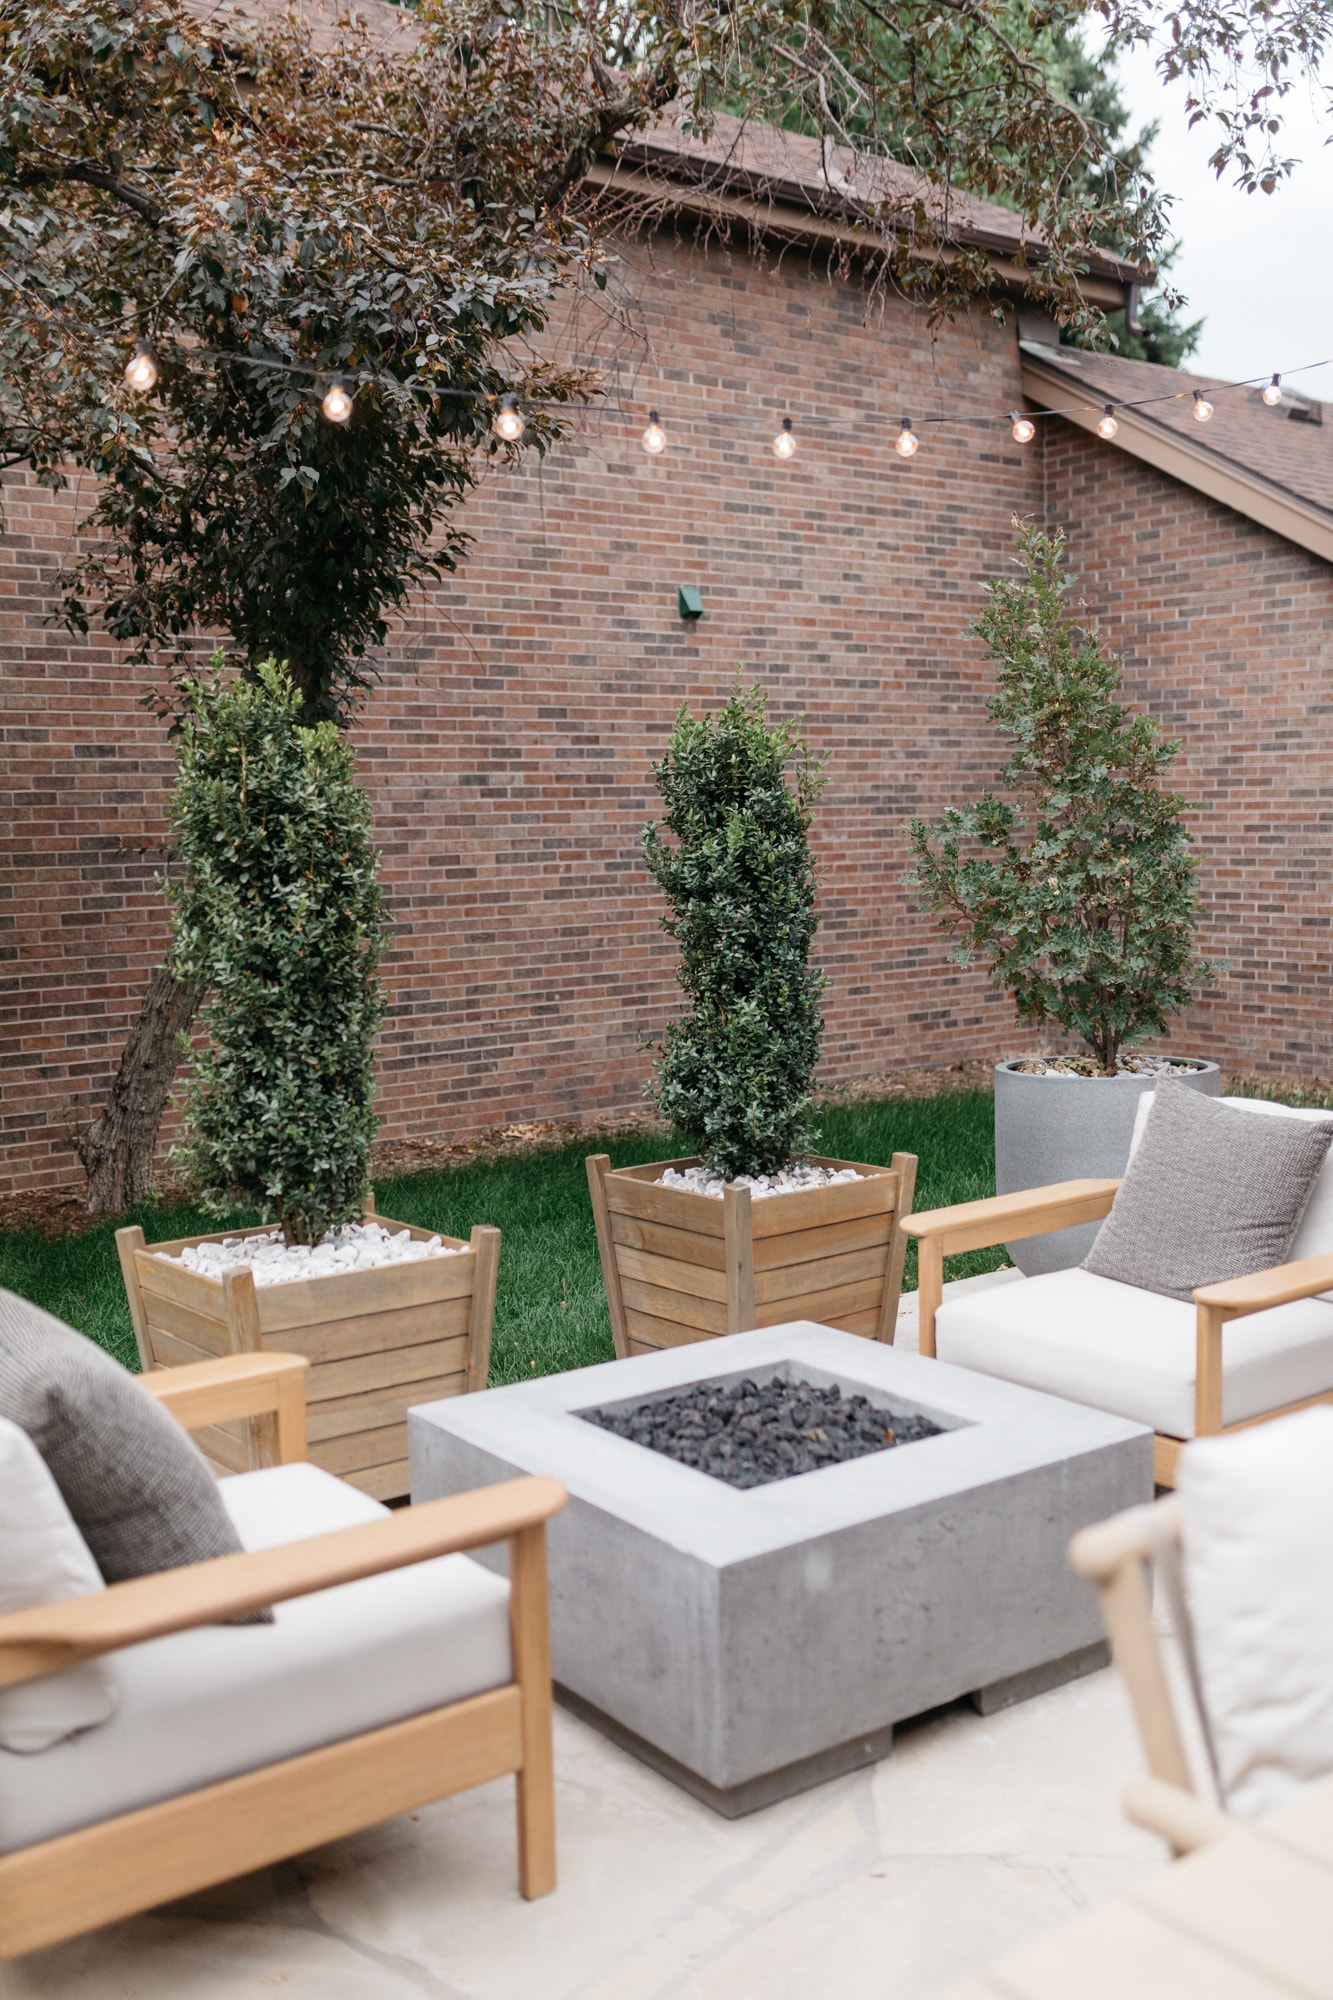 Brighton butler patio fireplace and chairs, planted boxwood plants, patio planted plants, string lights